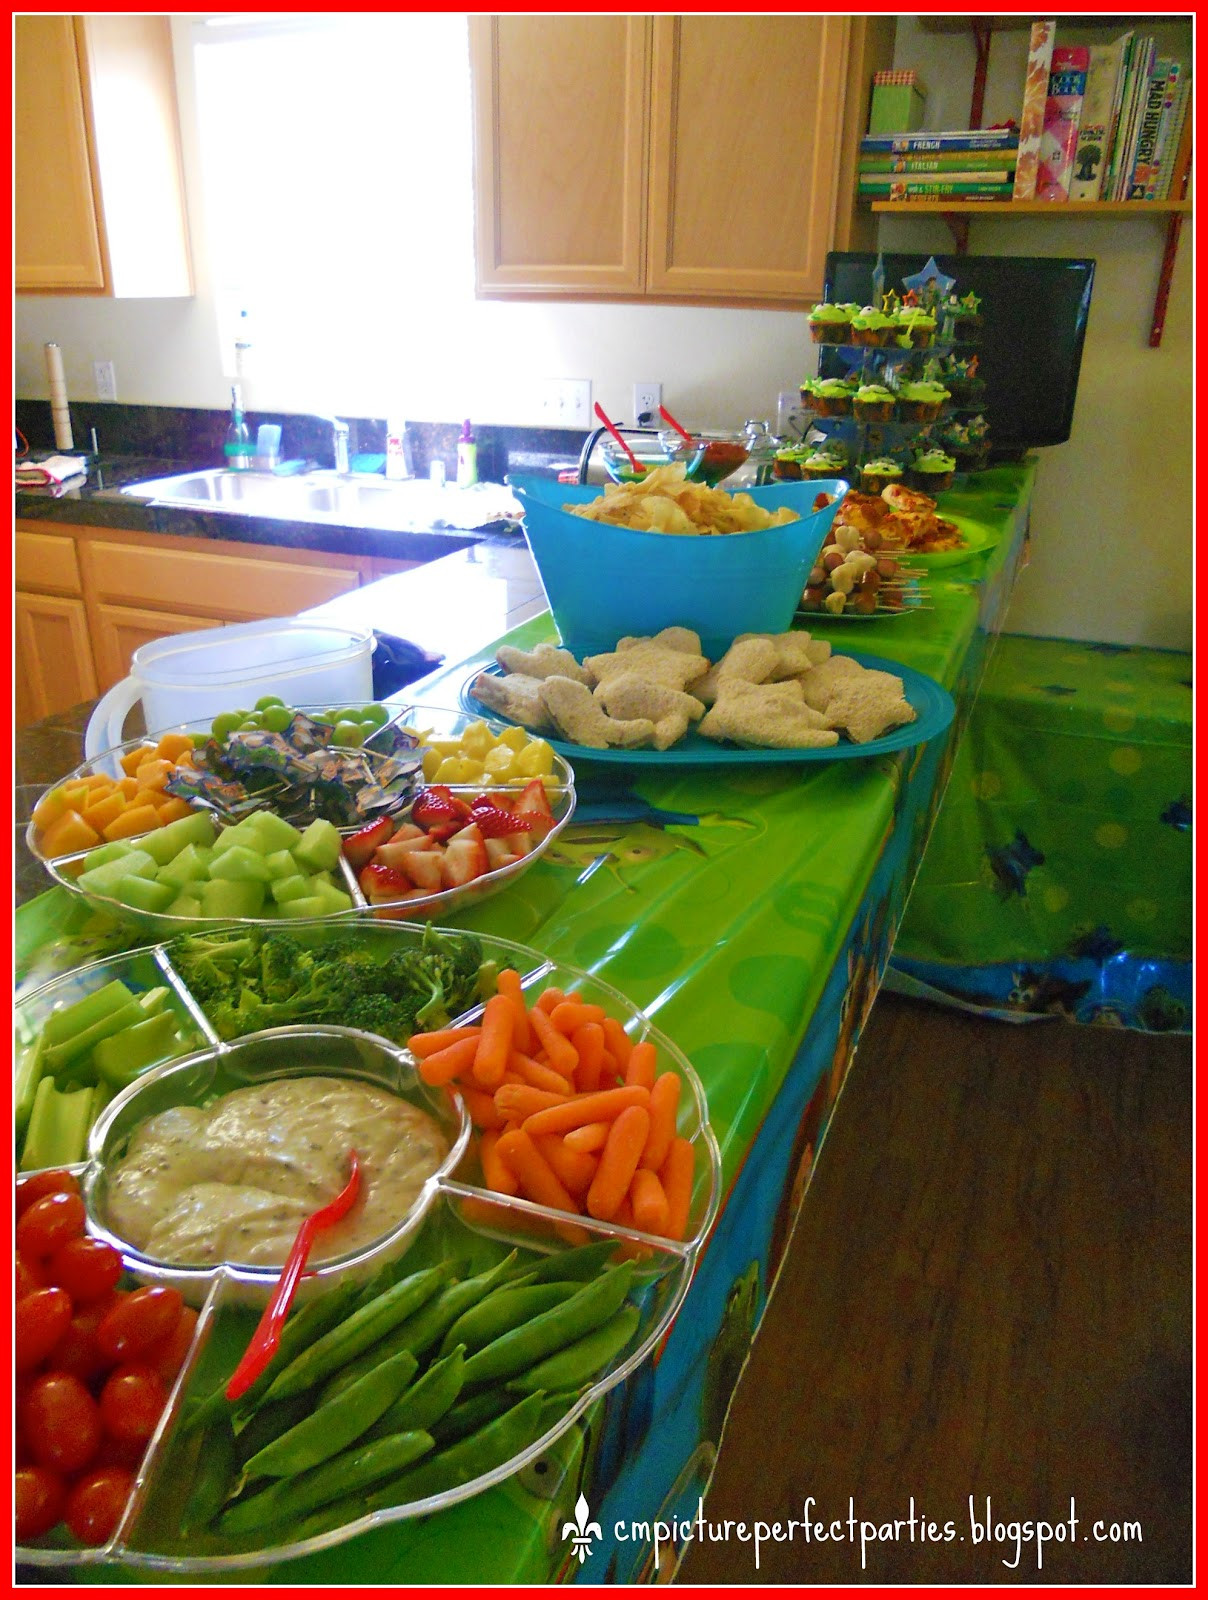 Toy Story Party Food Ideas
 Measurements of Merriment Toy Story Birthday Party